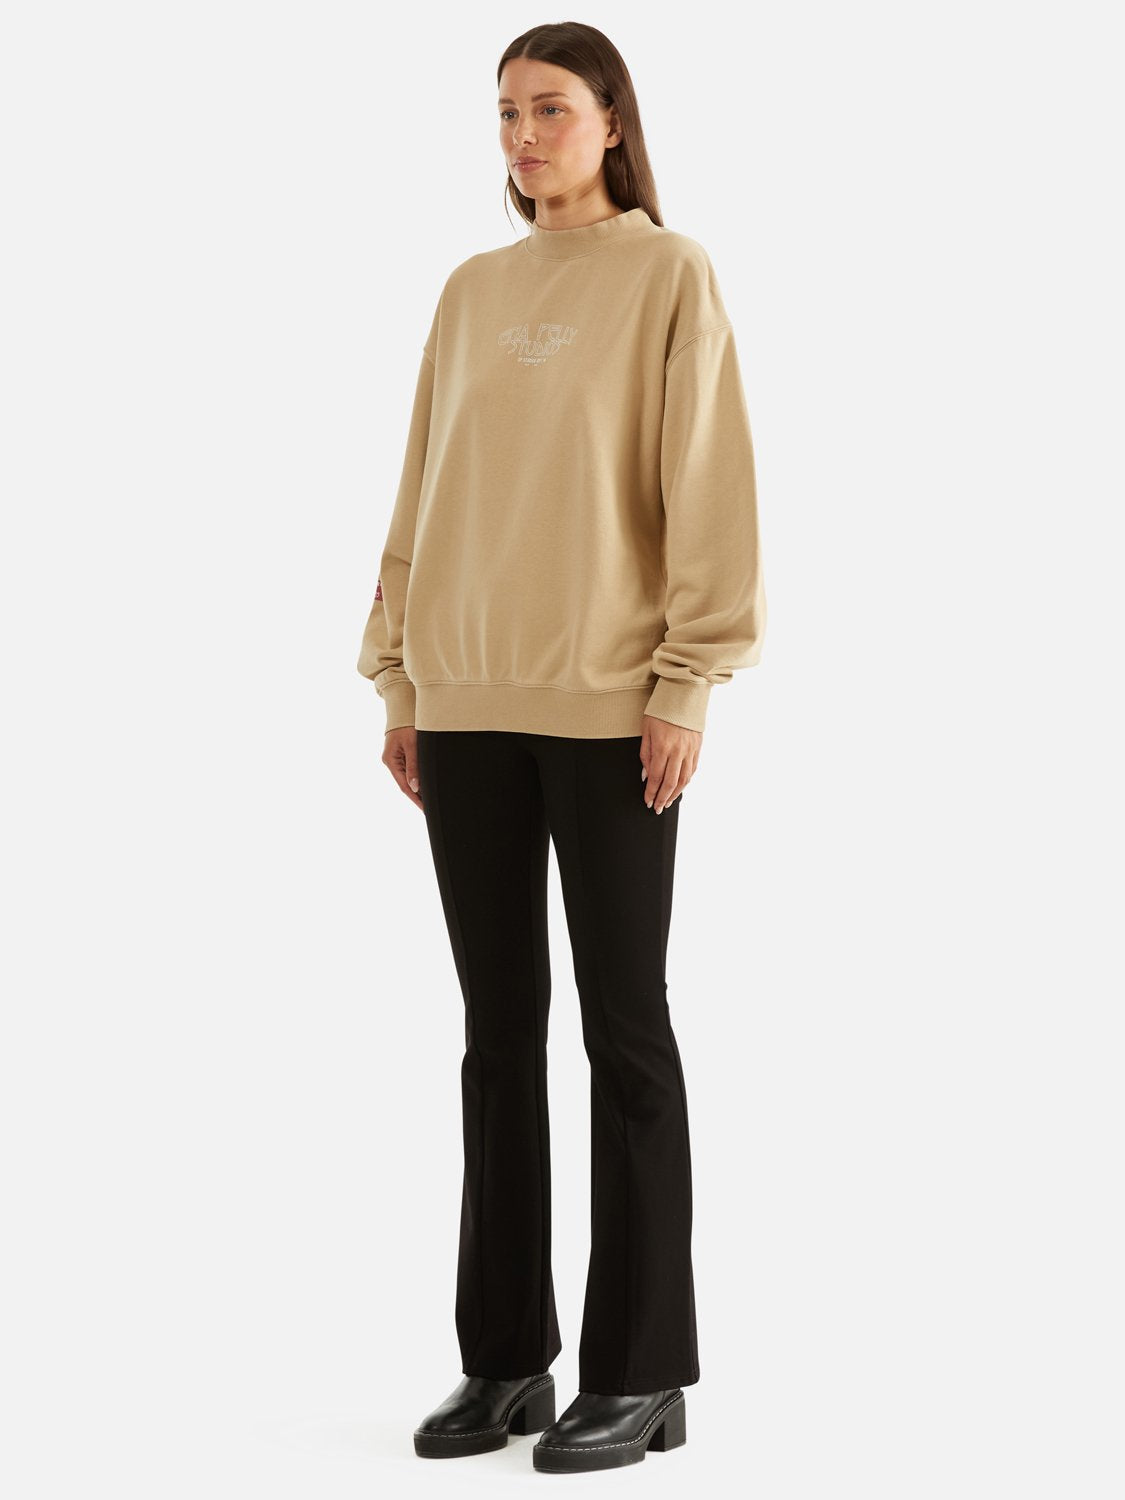 Chloe Oversized Sweater Sunflower - Biscuit